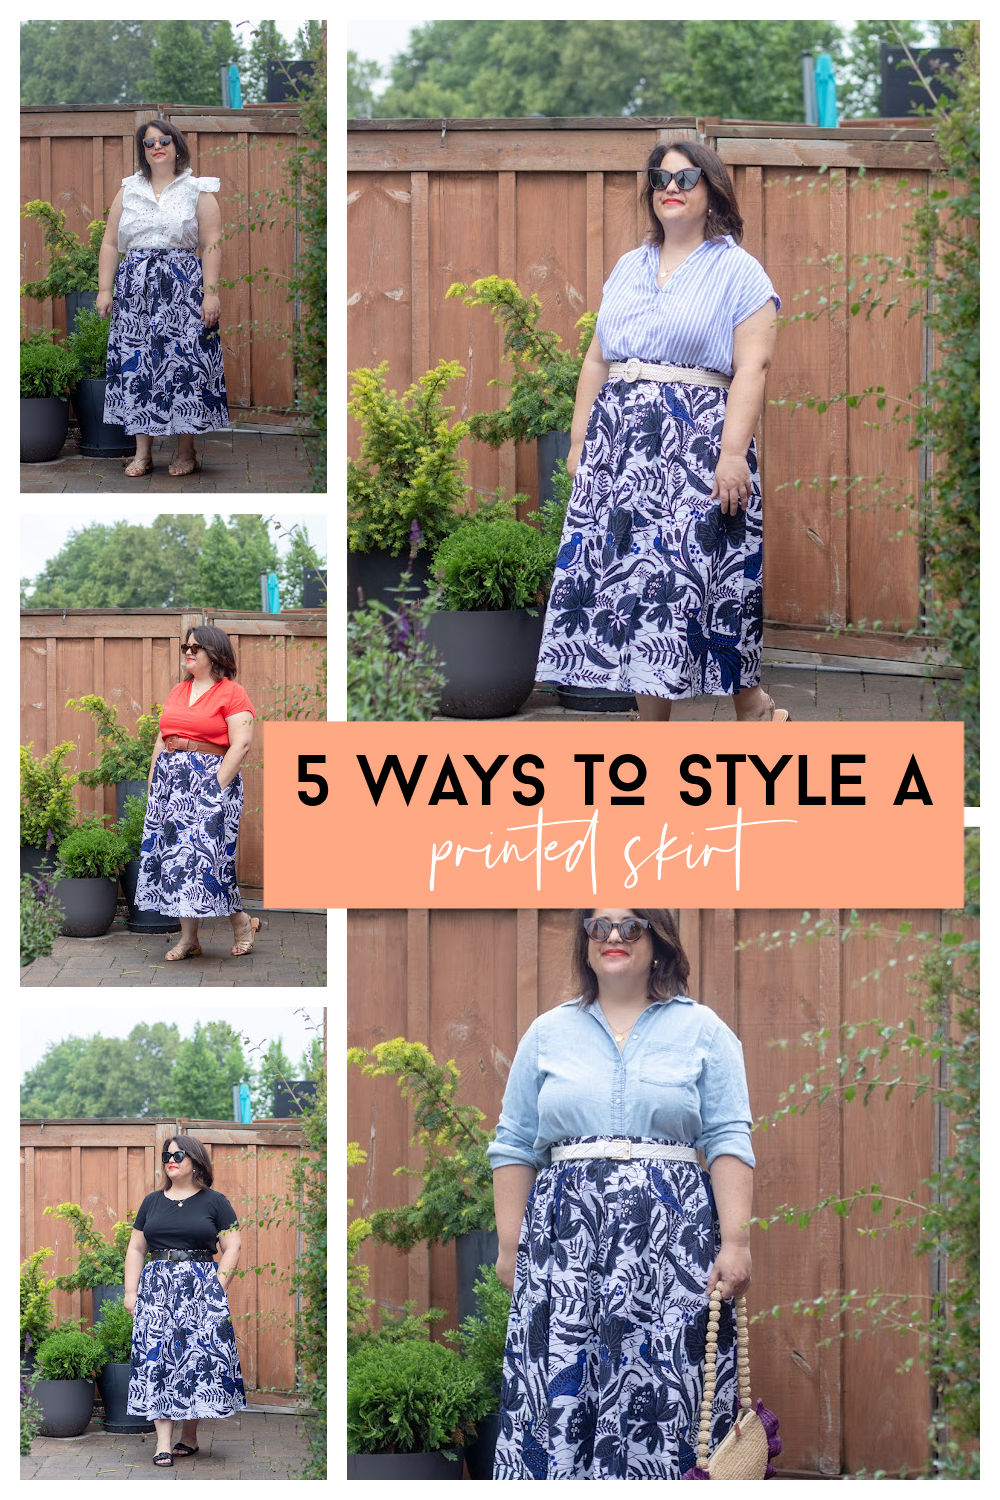 5 ways to style a printed skirt